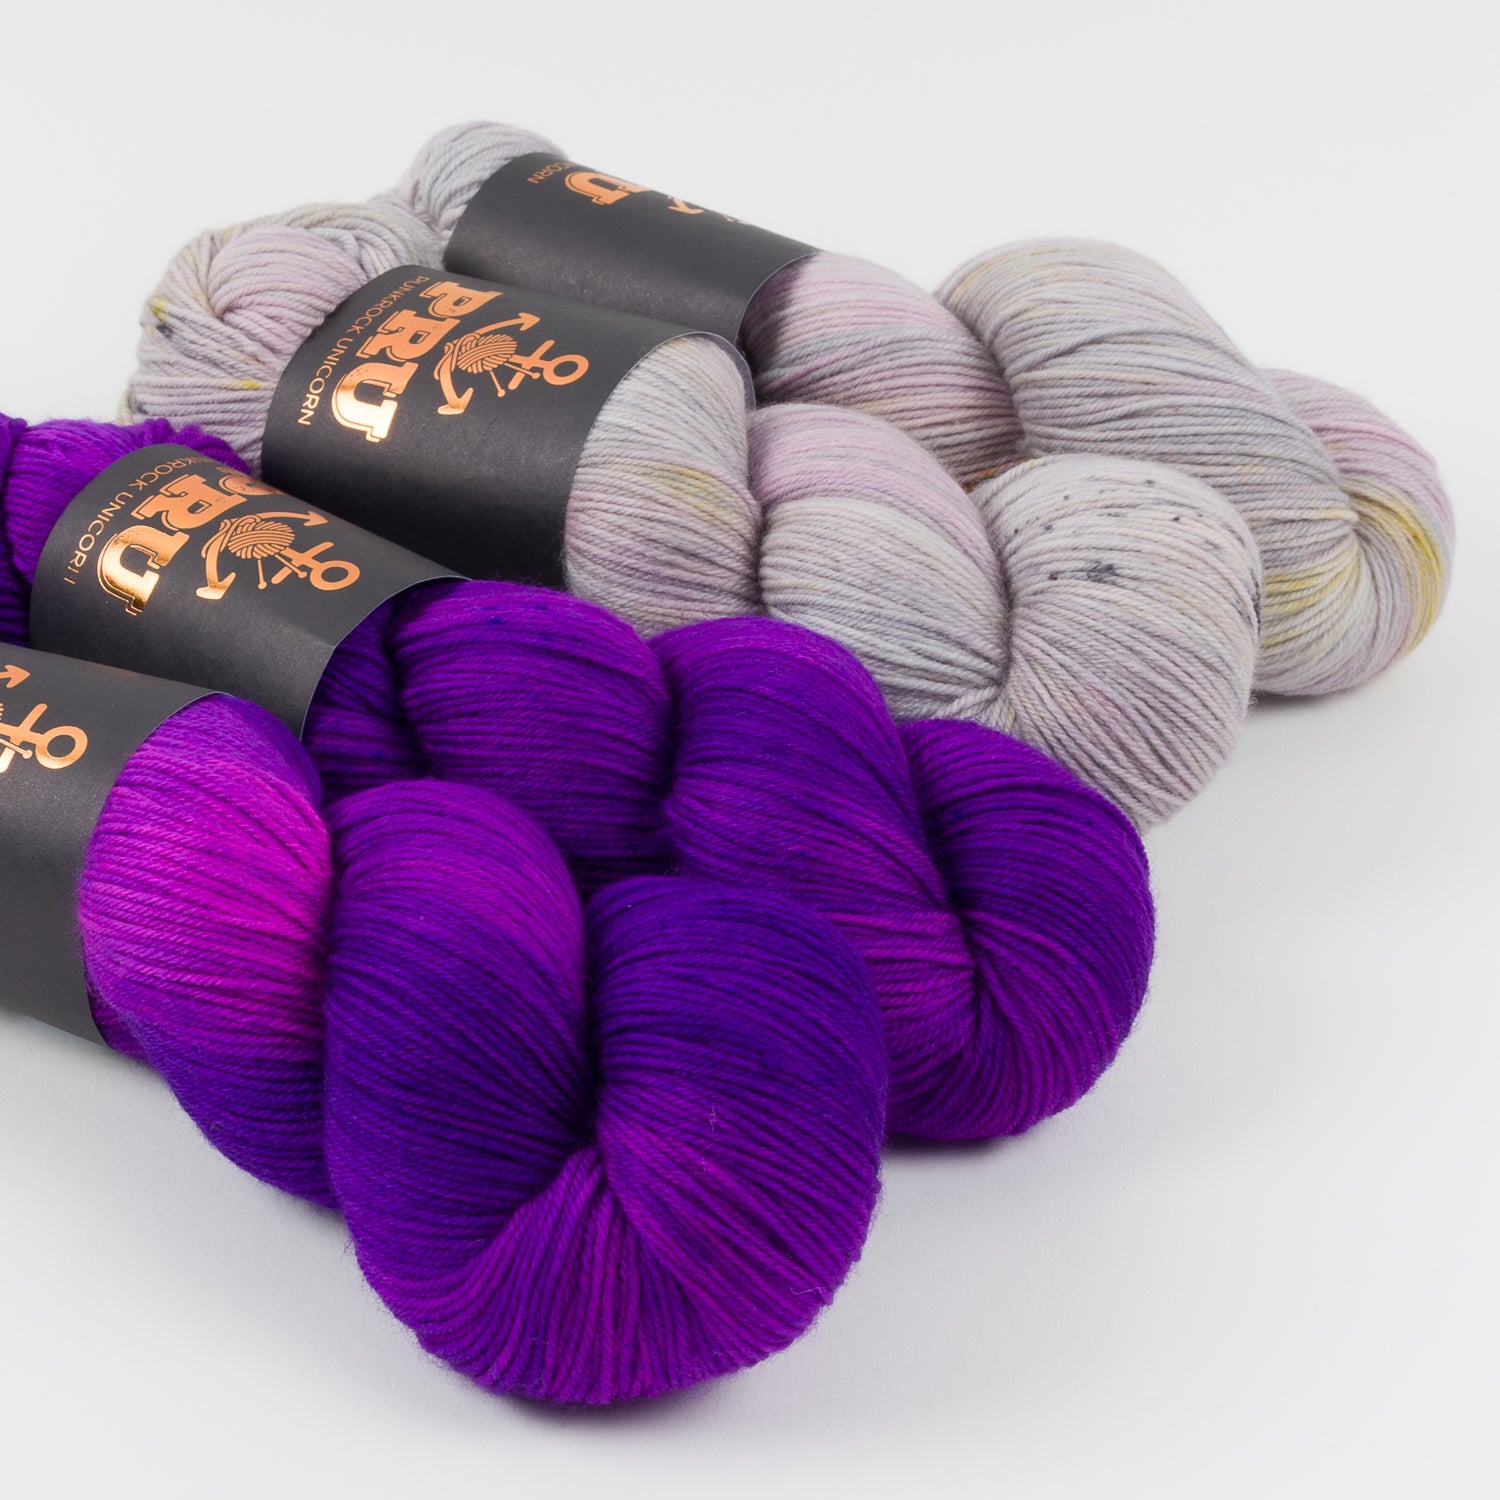 WESTKNITS KIT - CLEMATIS CONTRAST